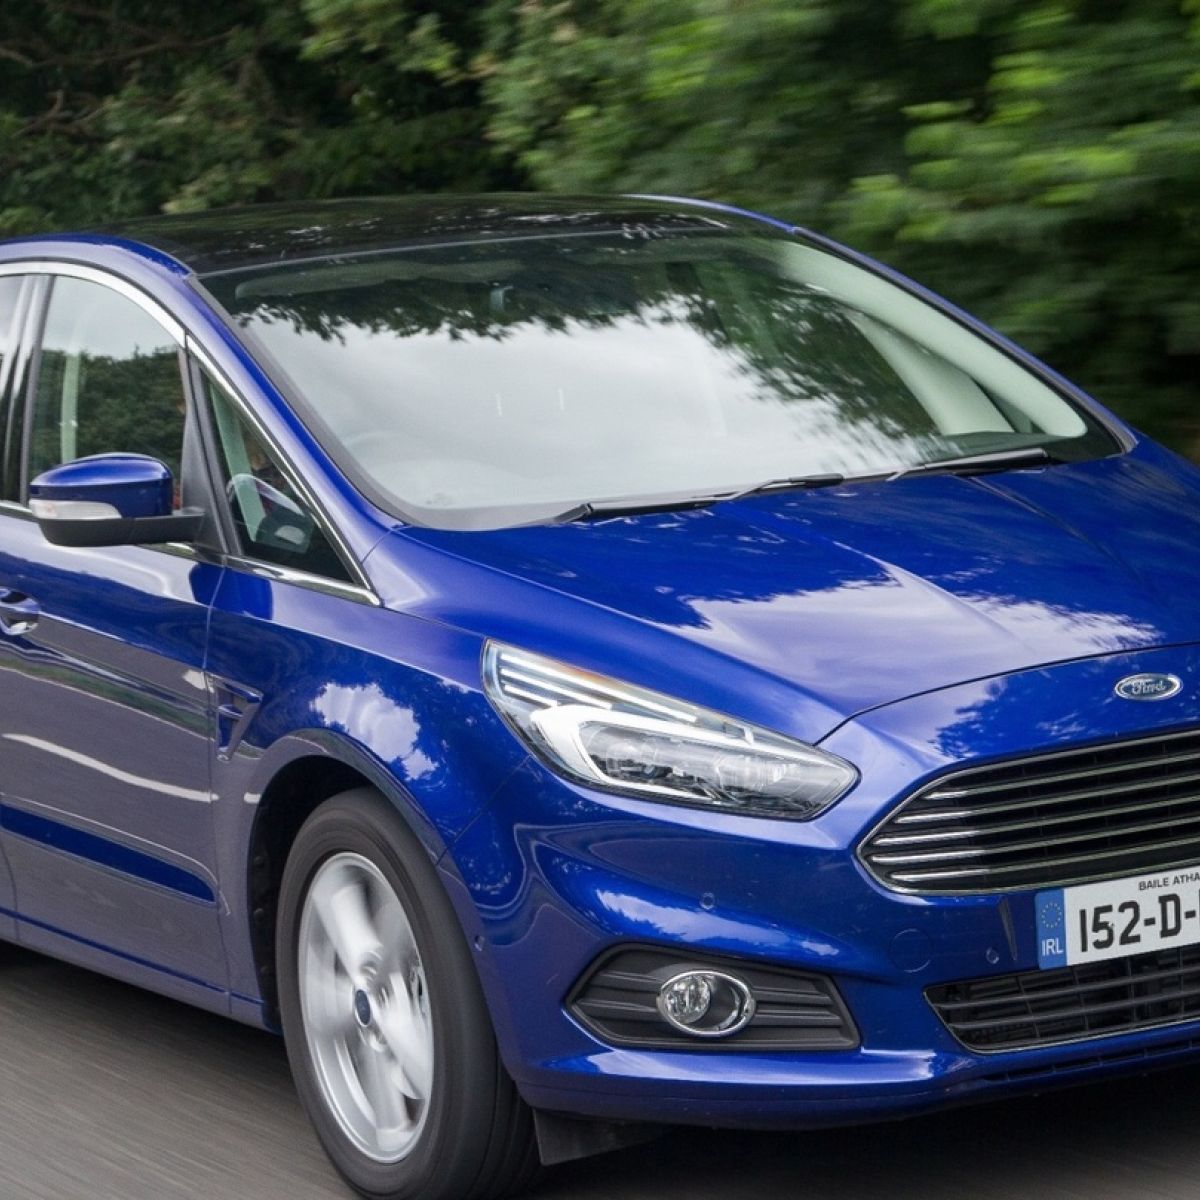 Road Test Ford Returns To Form With Practical S Max